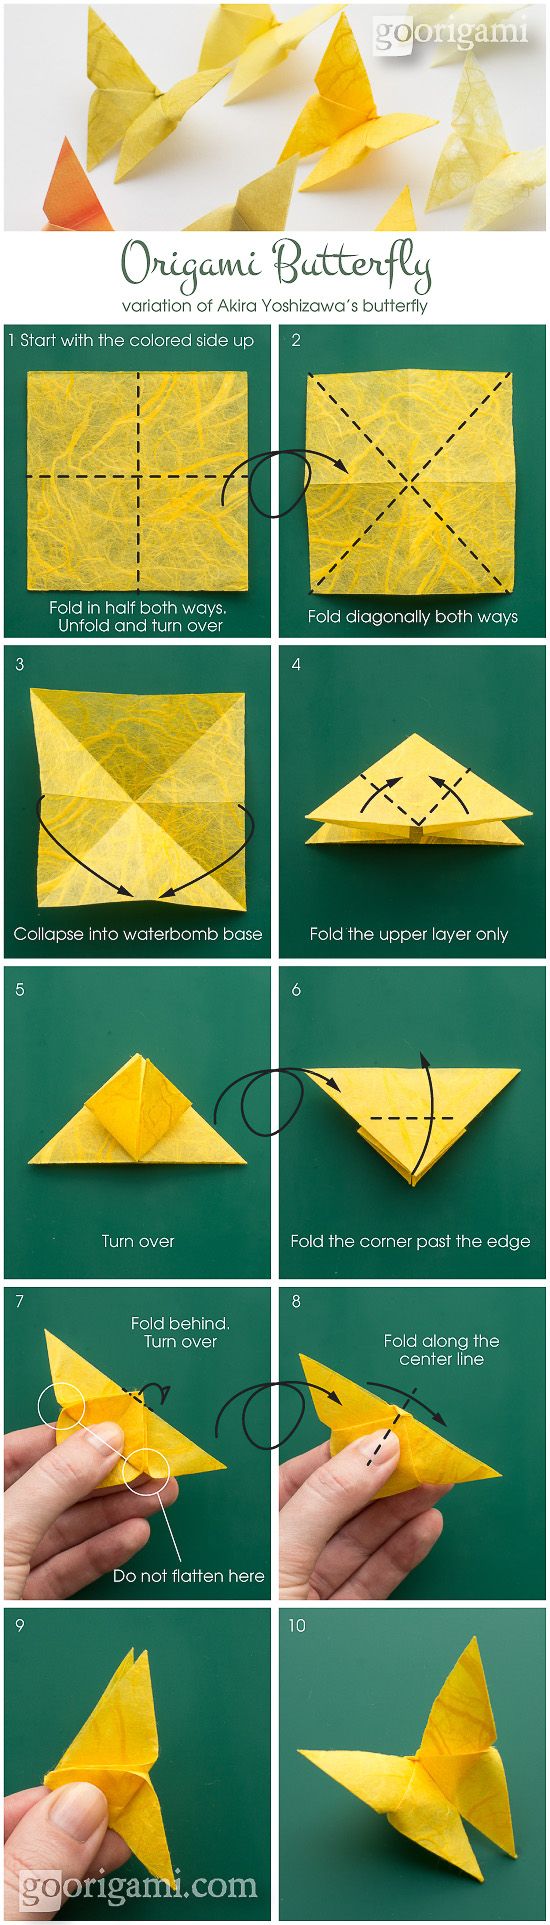 DIY: origami butterfly